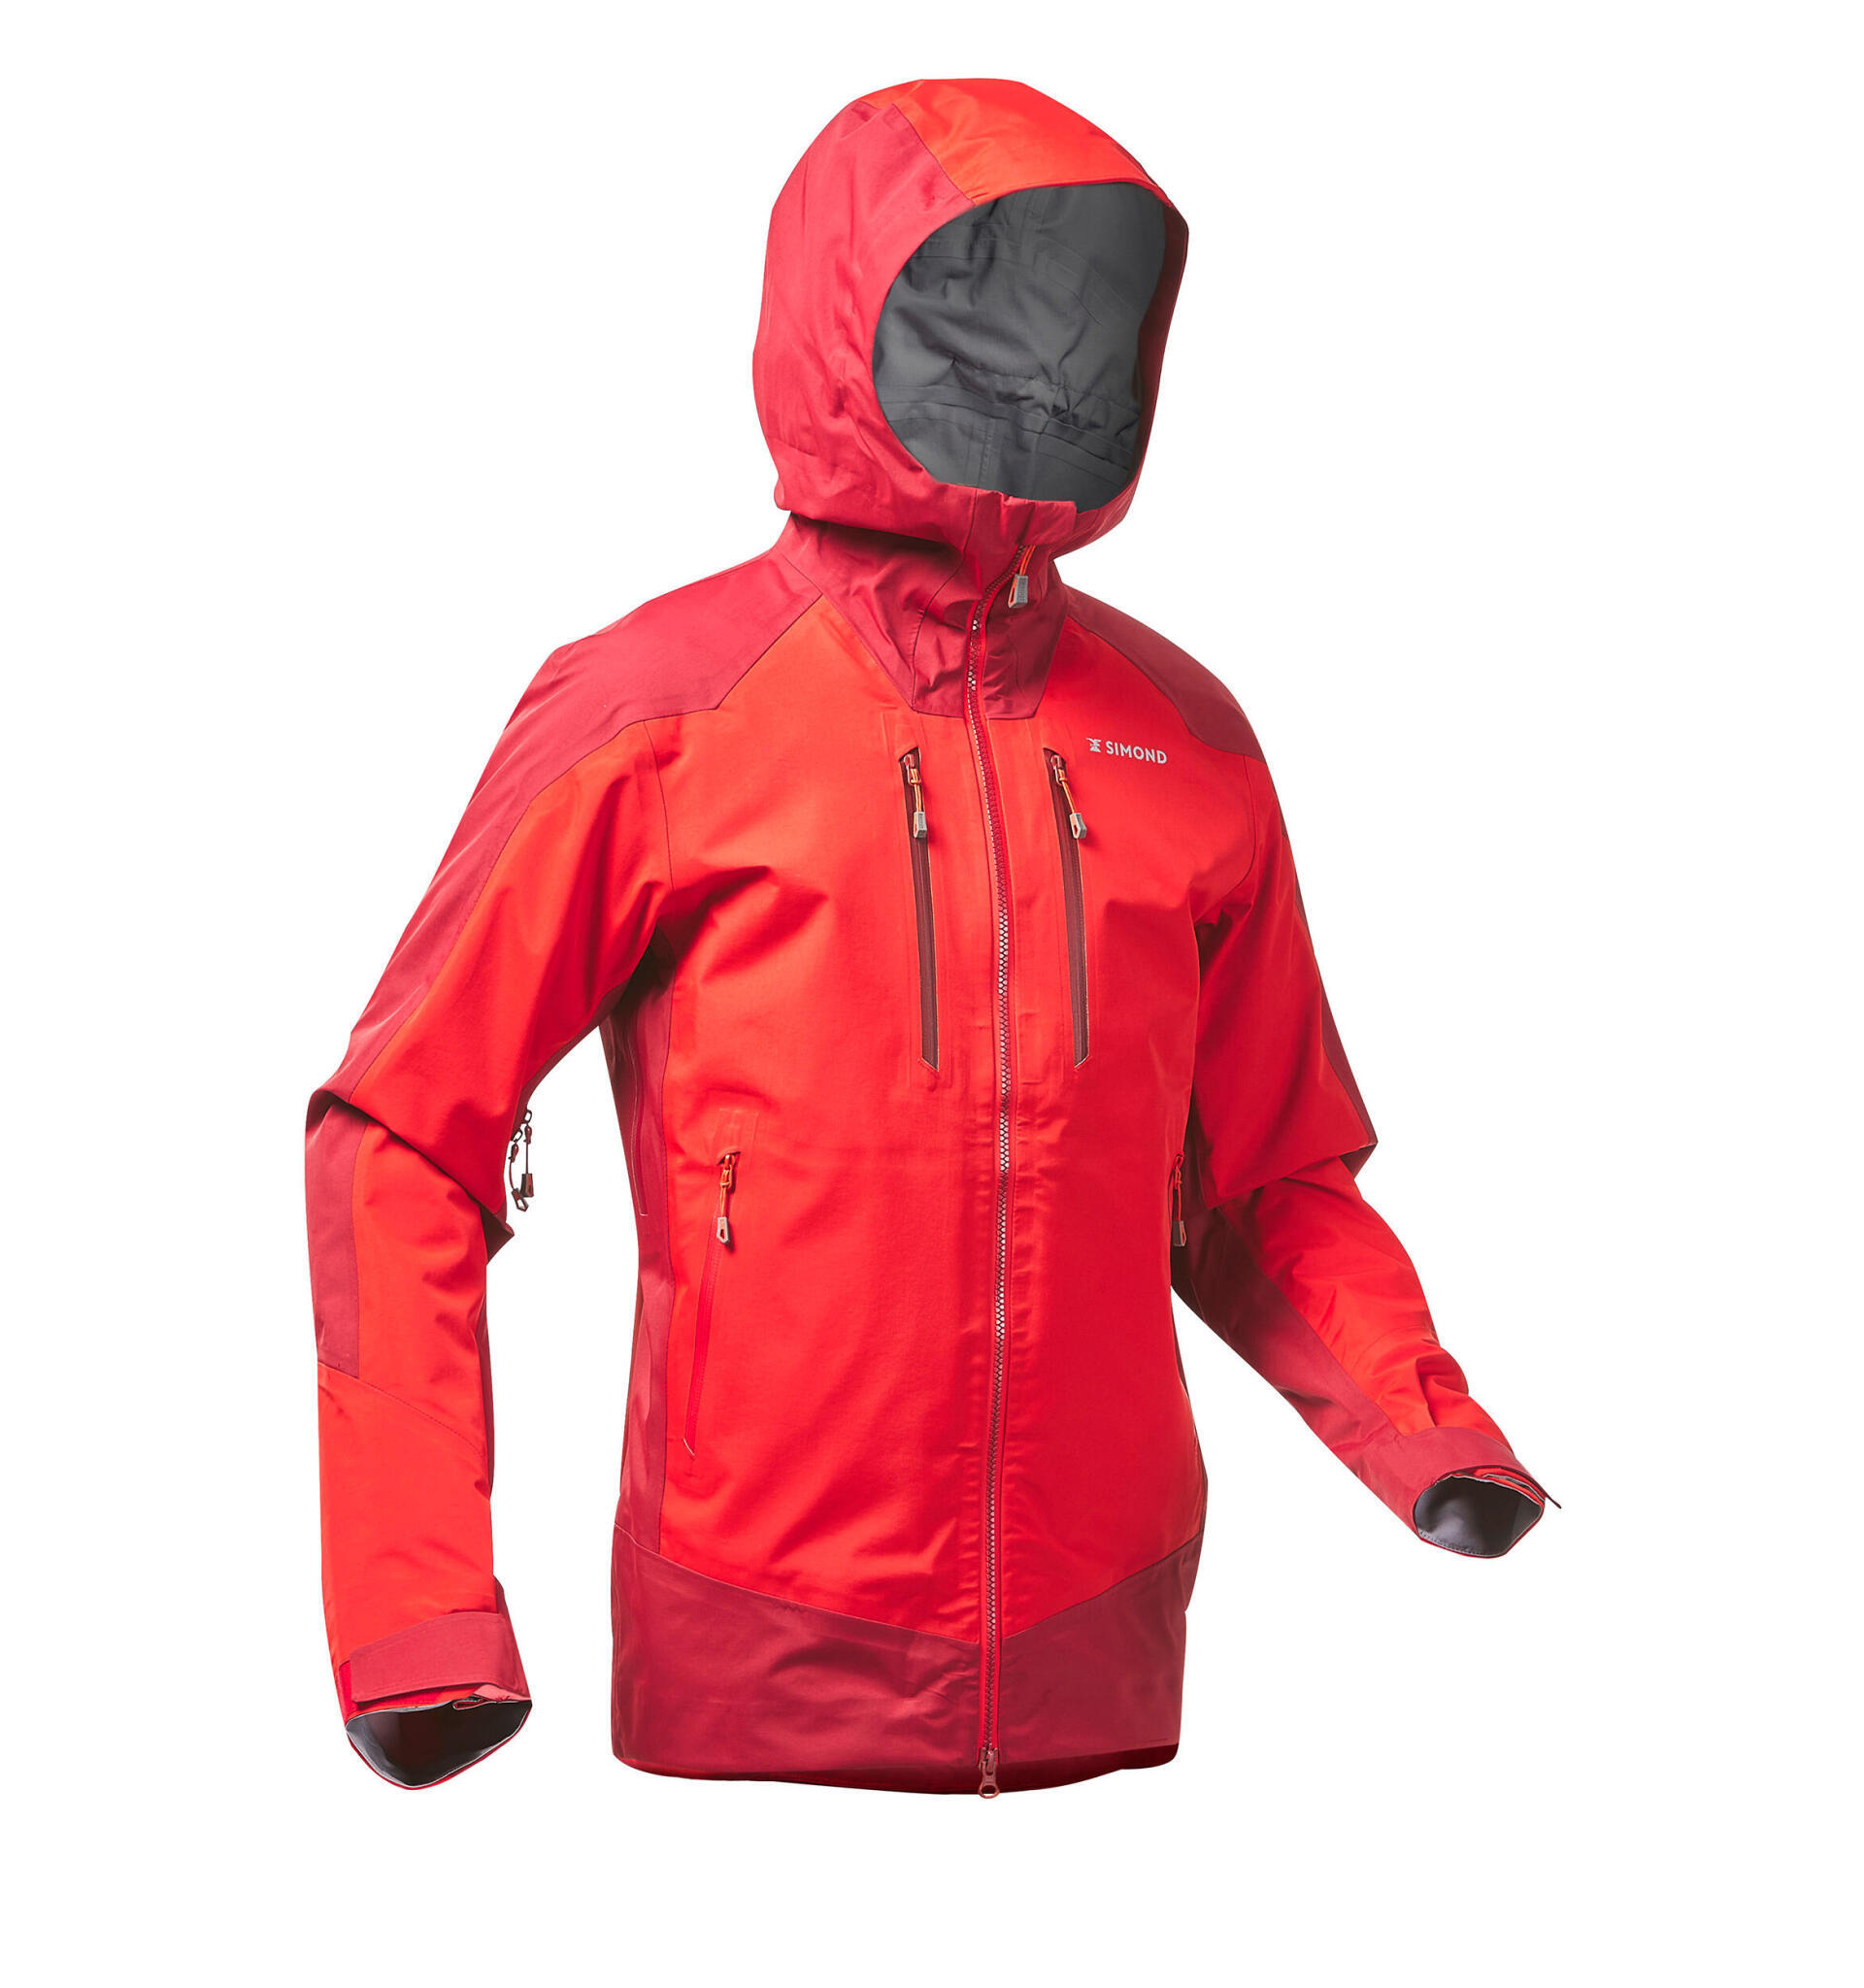 performance pack - winter mixed-terrain mountaineering 